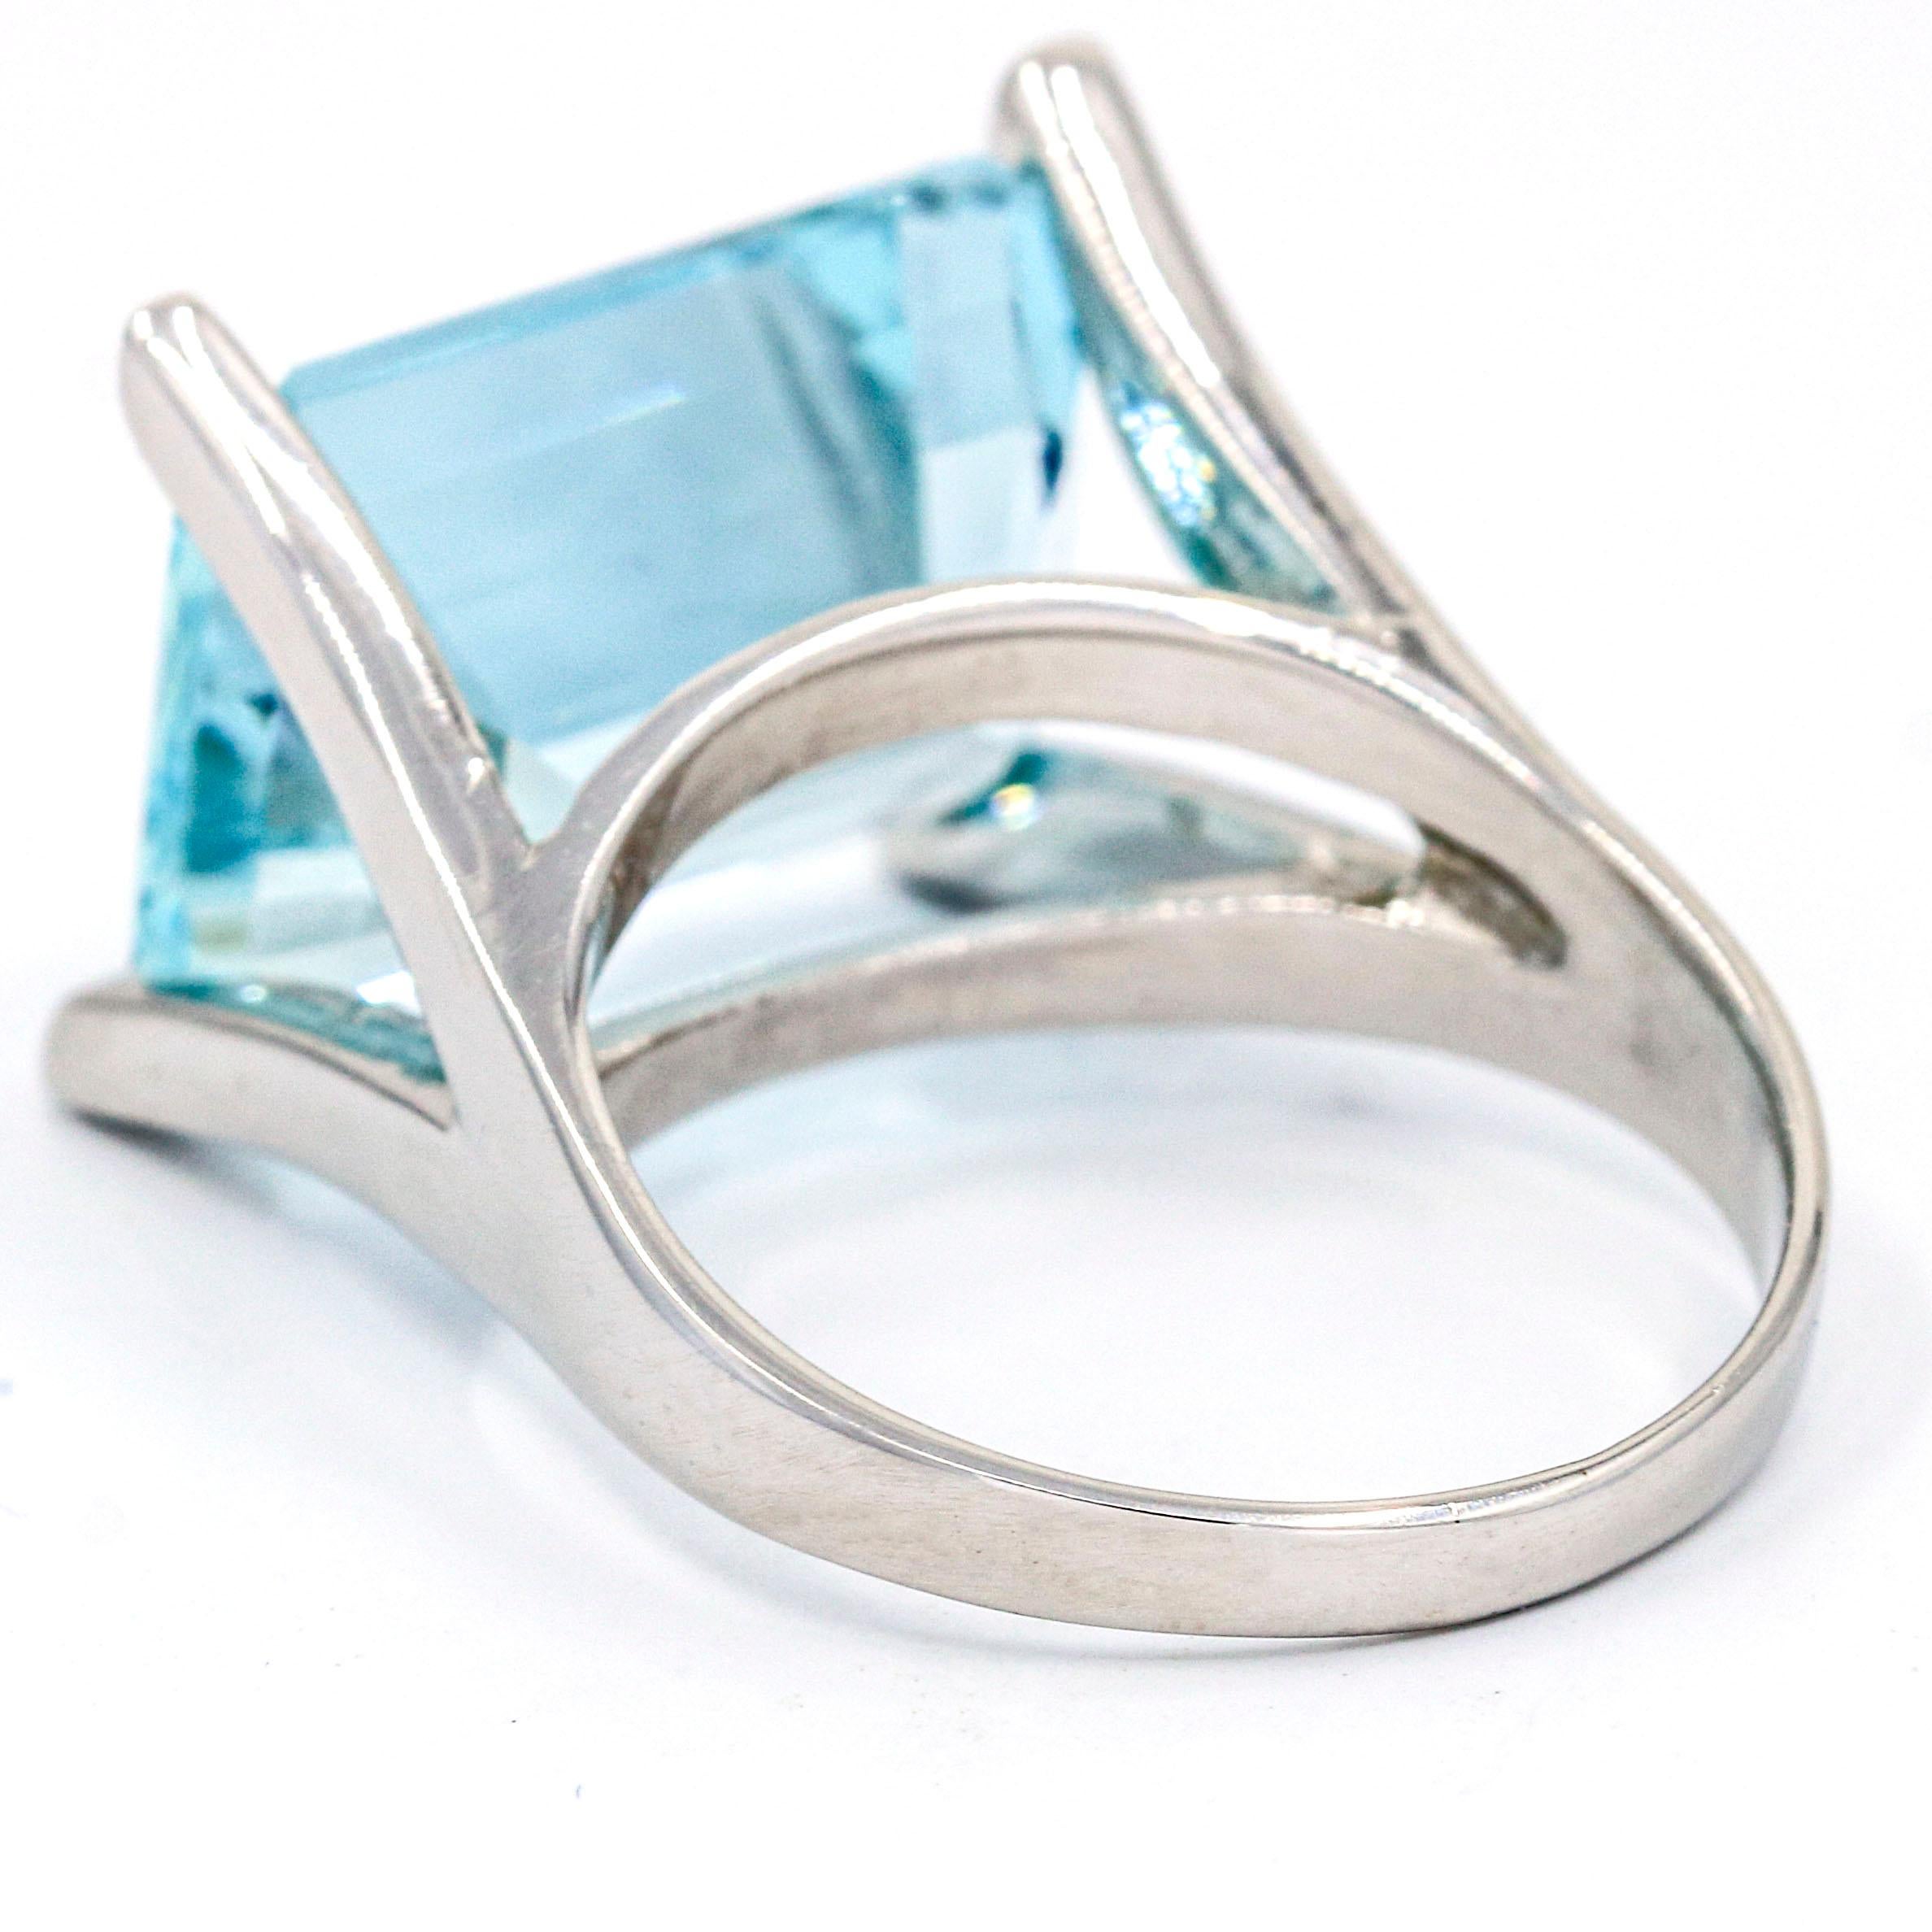 8.50 Carat 14 Karat White Gold Aquamarine Cocktail Ring In Excellent Condition For Sale In Fort Lauderdale, FL